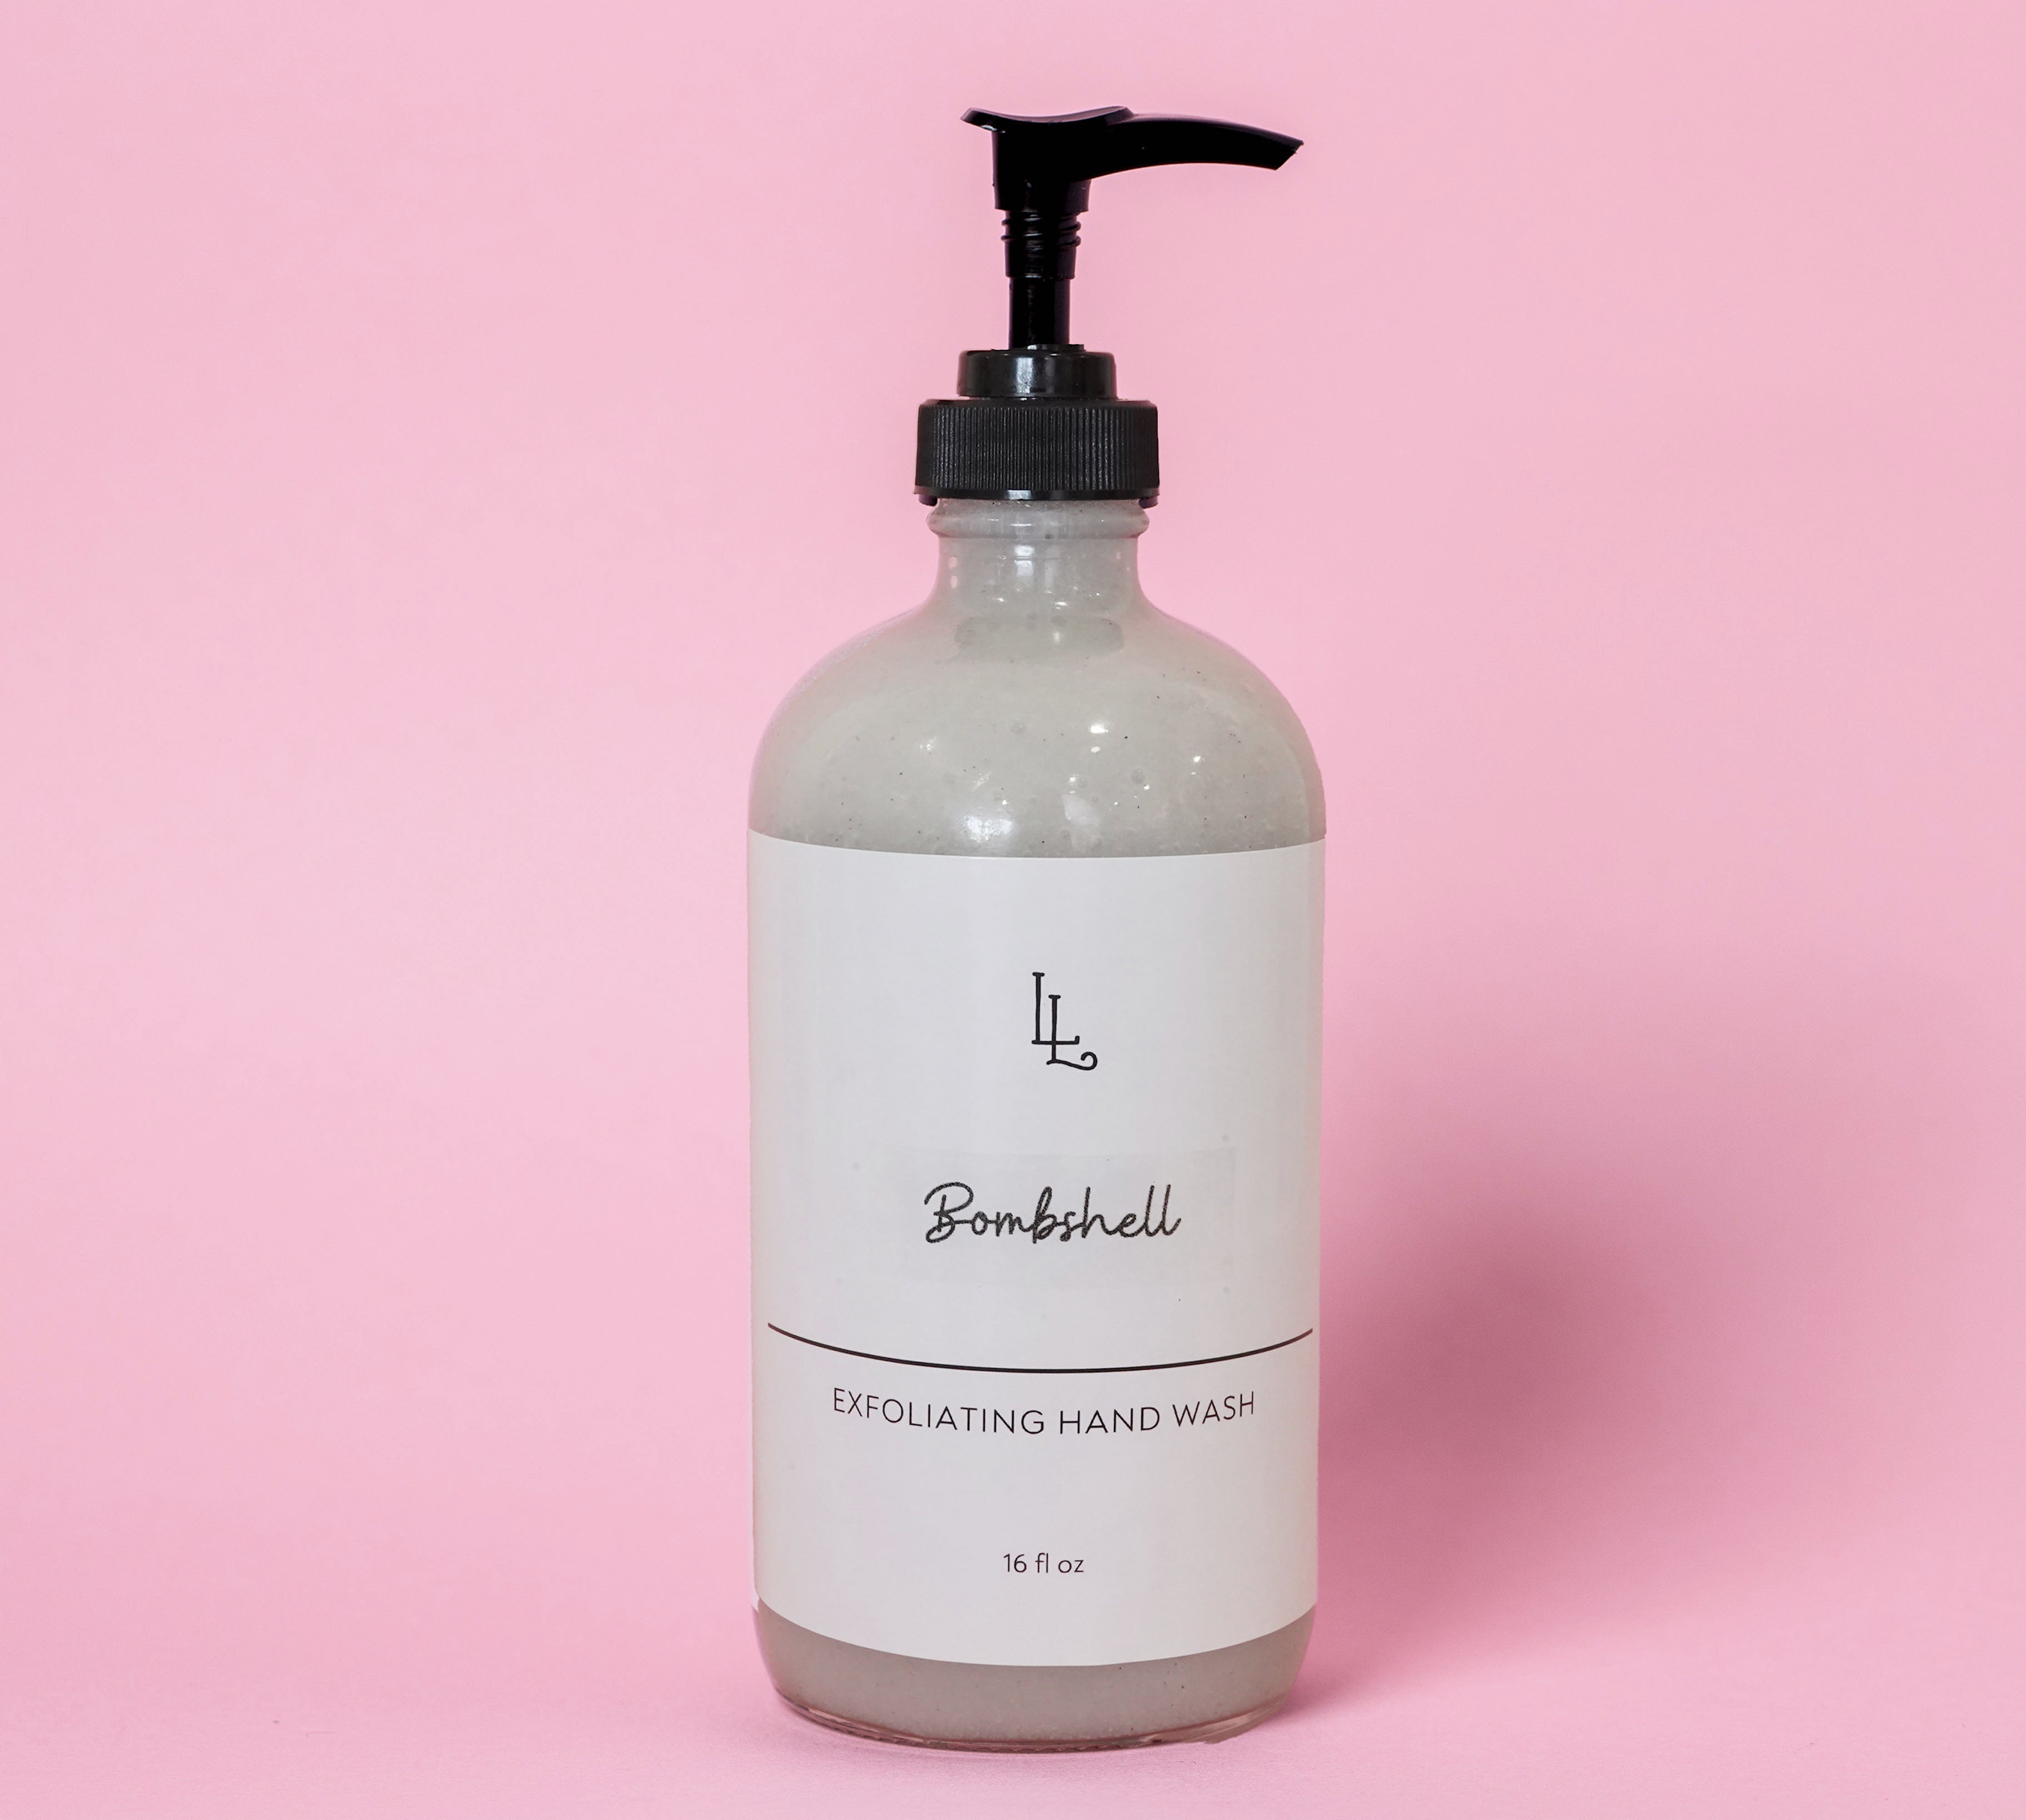 Bombshell Exfoliating Hand Wash – Local Lather Refillery & Soap Shop